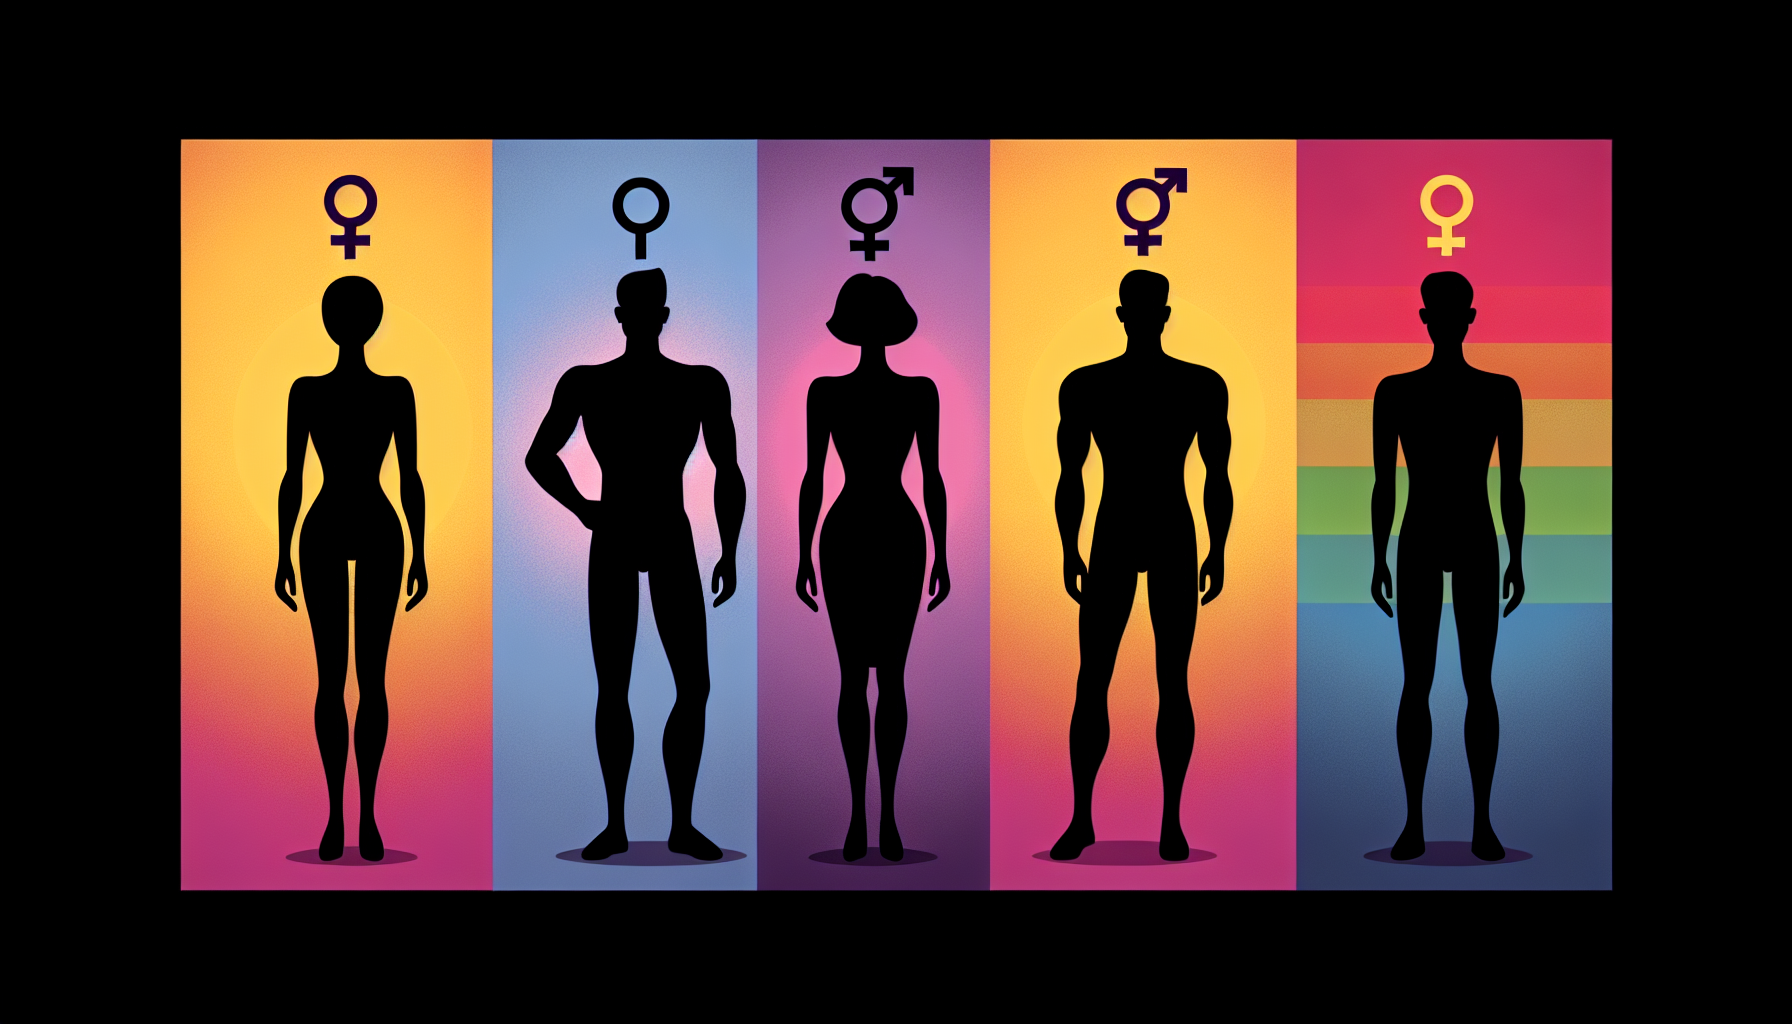 Four gender categories represented by diverse silhouettes with different gender expressions